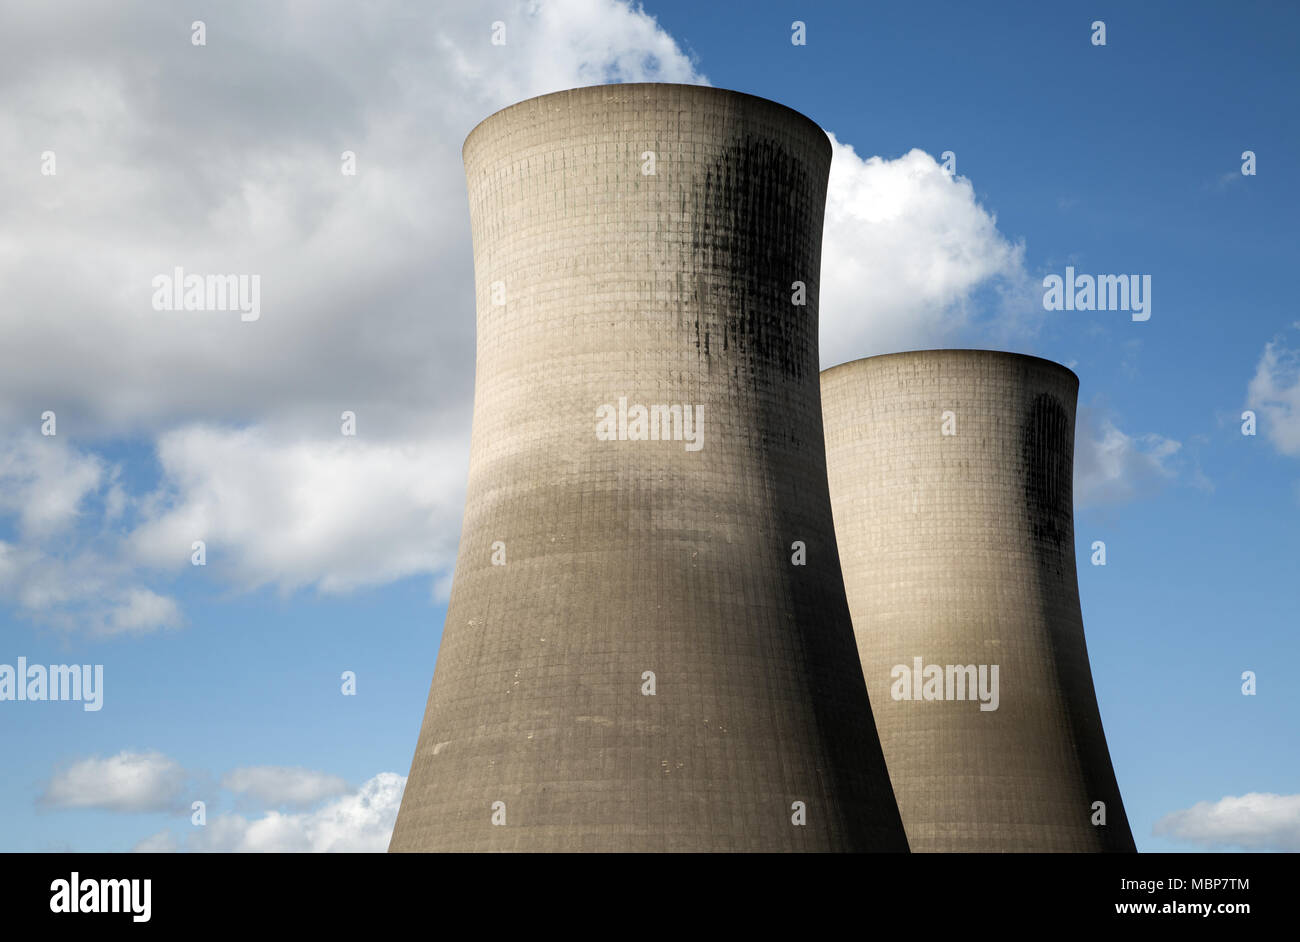 Cooling towers, Middlesbrough, England. Stock Photo